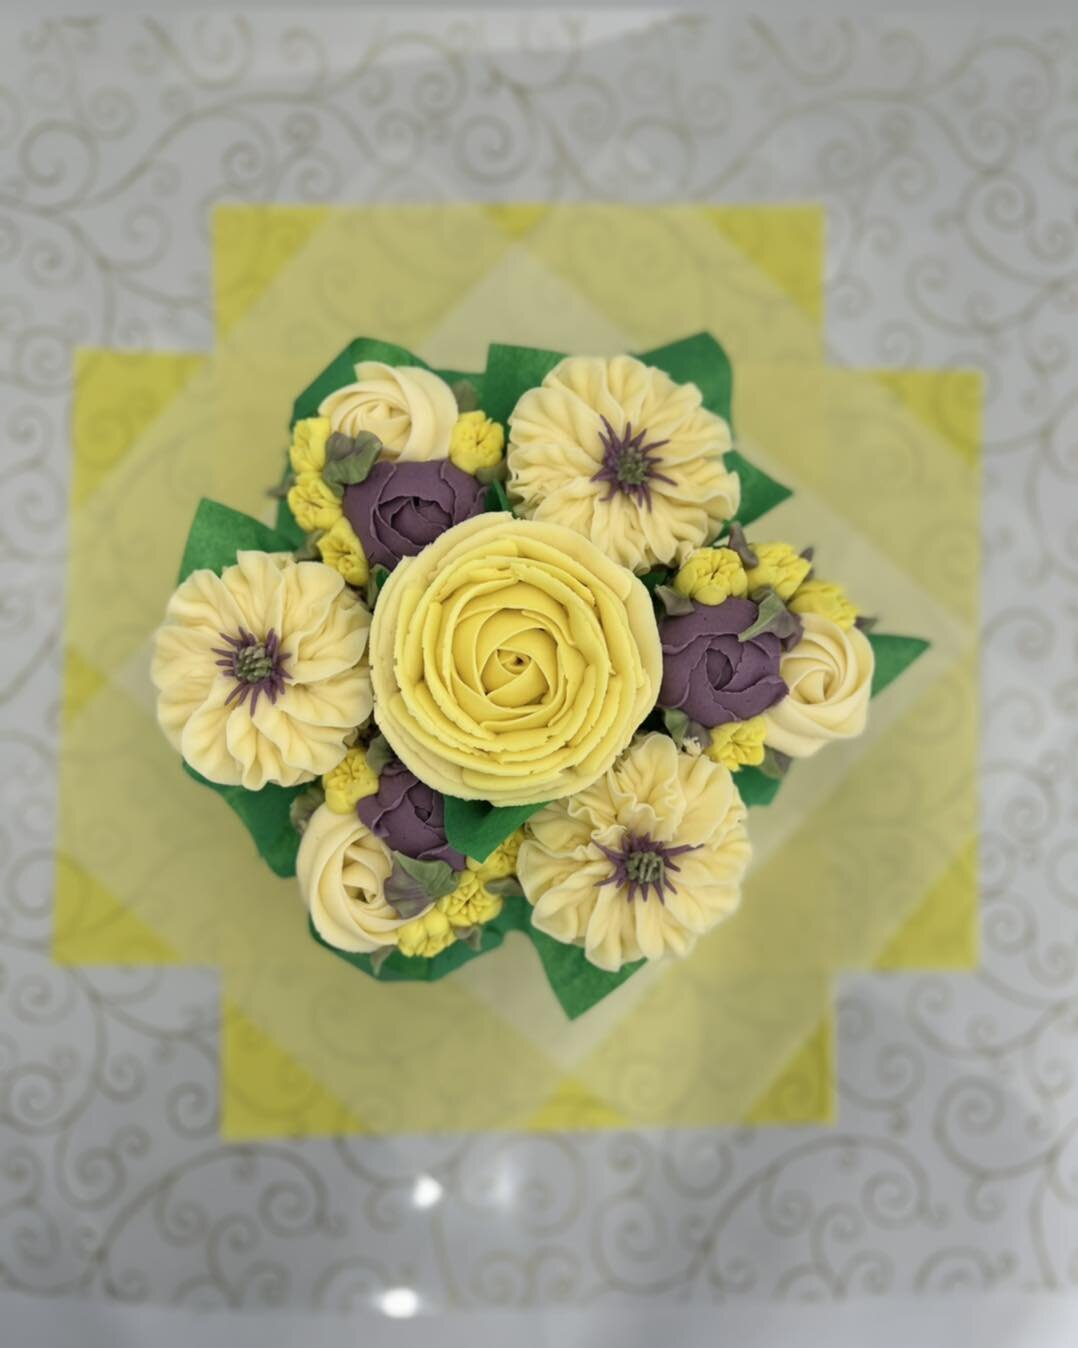 Get your gifts all wrapped up with a delicious cupcake bouquet!
Now taking orders https://www.tarasbakedbouquets.ie/small-cupcake-bouquet
#luckyirish #irishcupcake #irishcupcakes #kerrygold #madewithlove #bakedfreshforyou #irishbaker #kerrygoldbutter